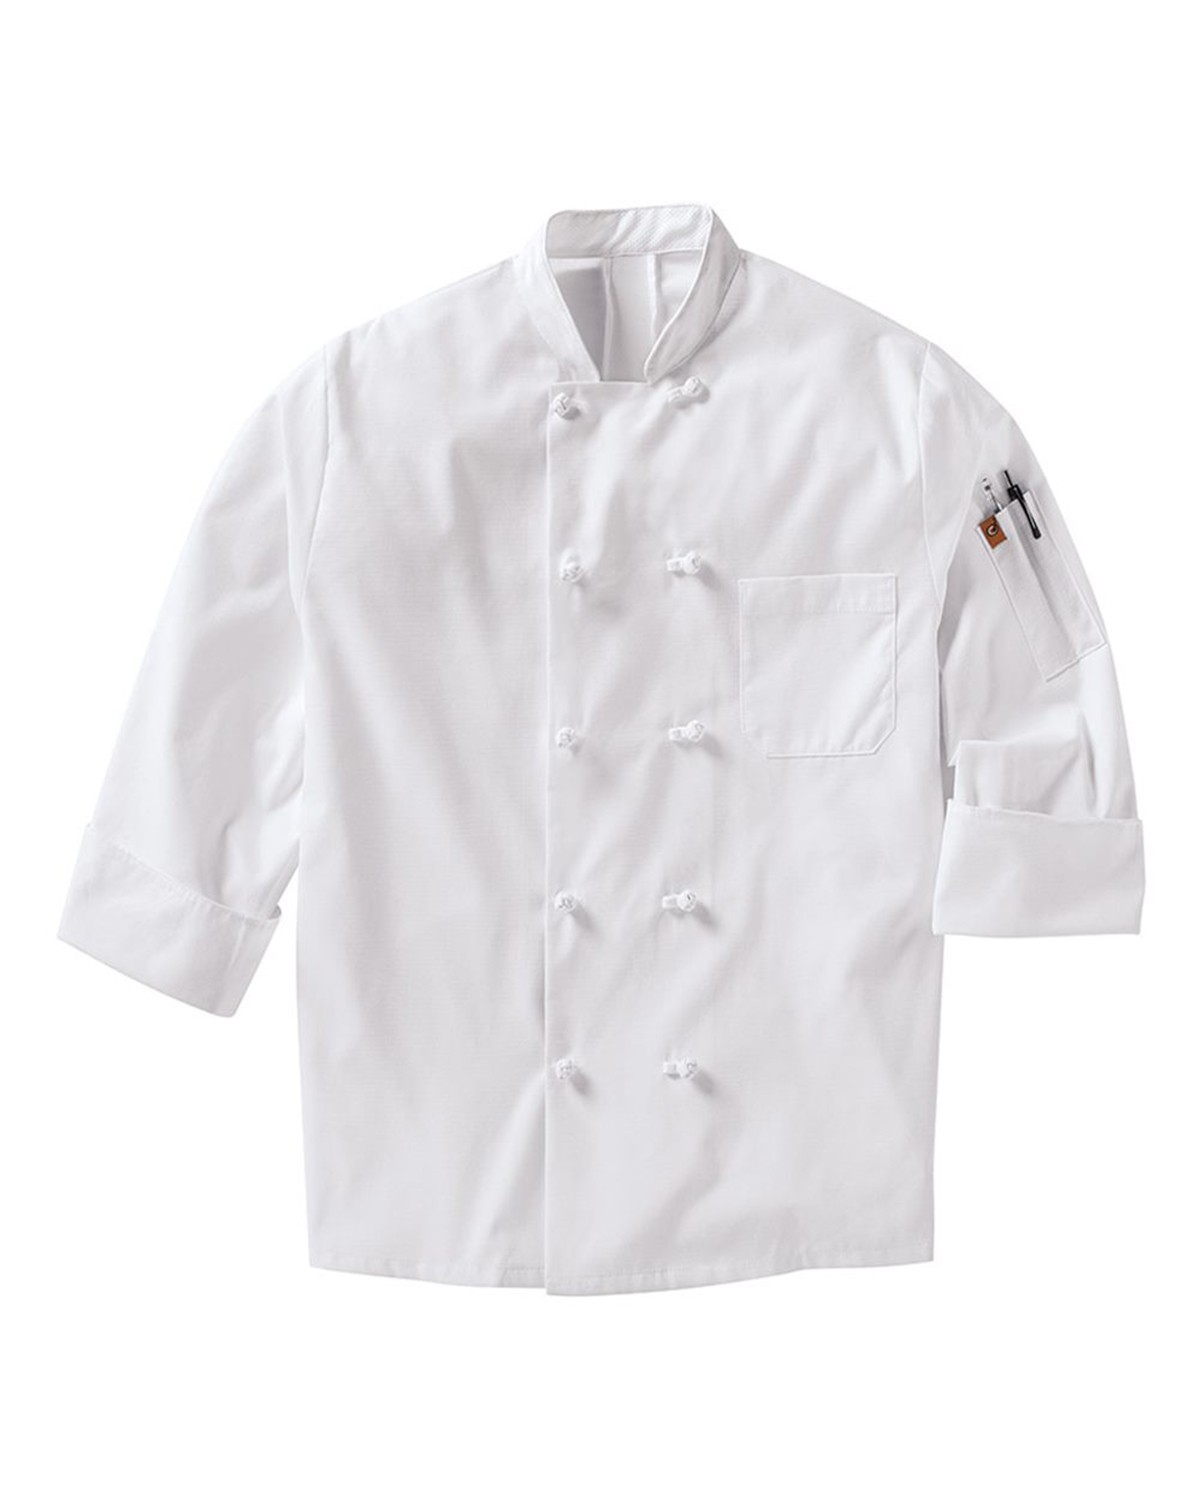 Black or White XS to 3XL Classic Knot W/ Mesh Chef Coat 0427 Free Shipping 